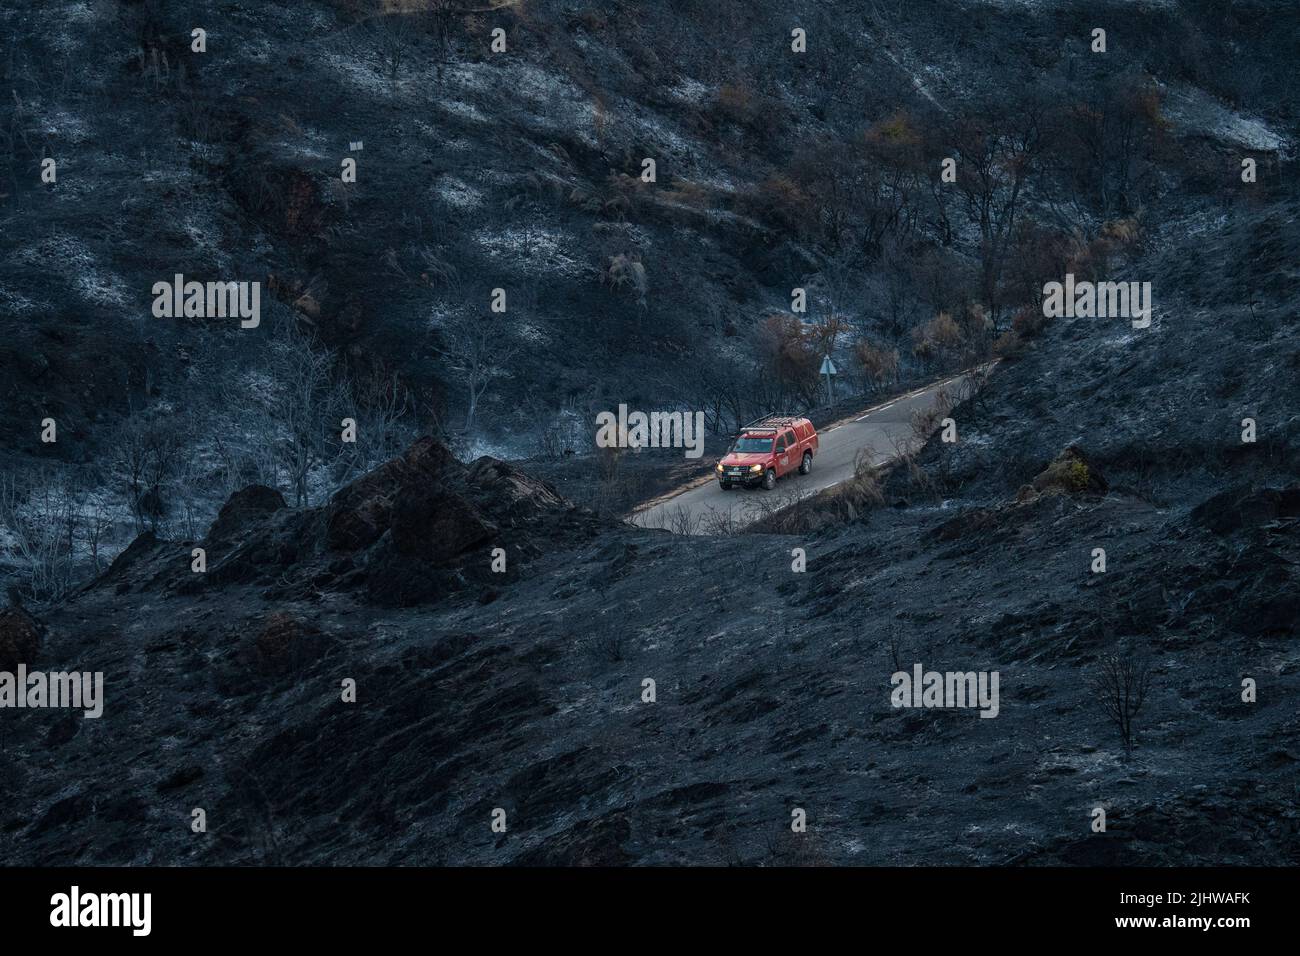 Guadalajara, Spain. 20th July, 2022. A vehicle of the Emergency Military Unit (UME) is seen near Valdepeñas de la Sierra, driving on a road through a field burned by a fire that has devastated more than 3,000 hectares. Wildfires have broken out across Spain amid a severe heatwave. Credit: Marcos del Mazo/Alamy Live News Stock Photo